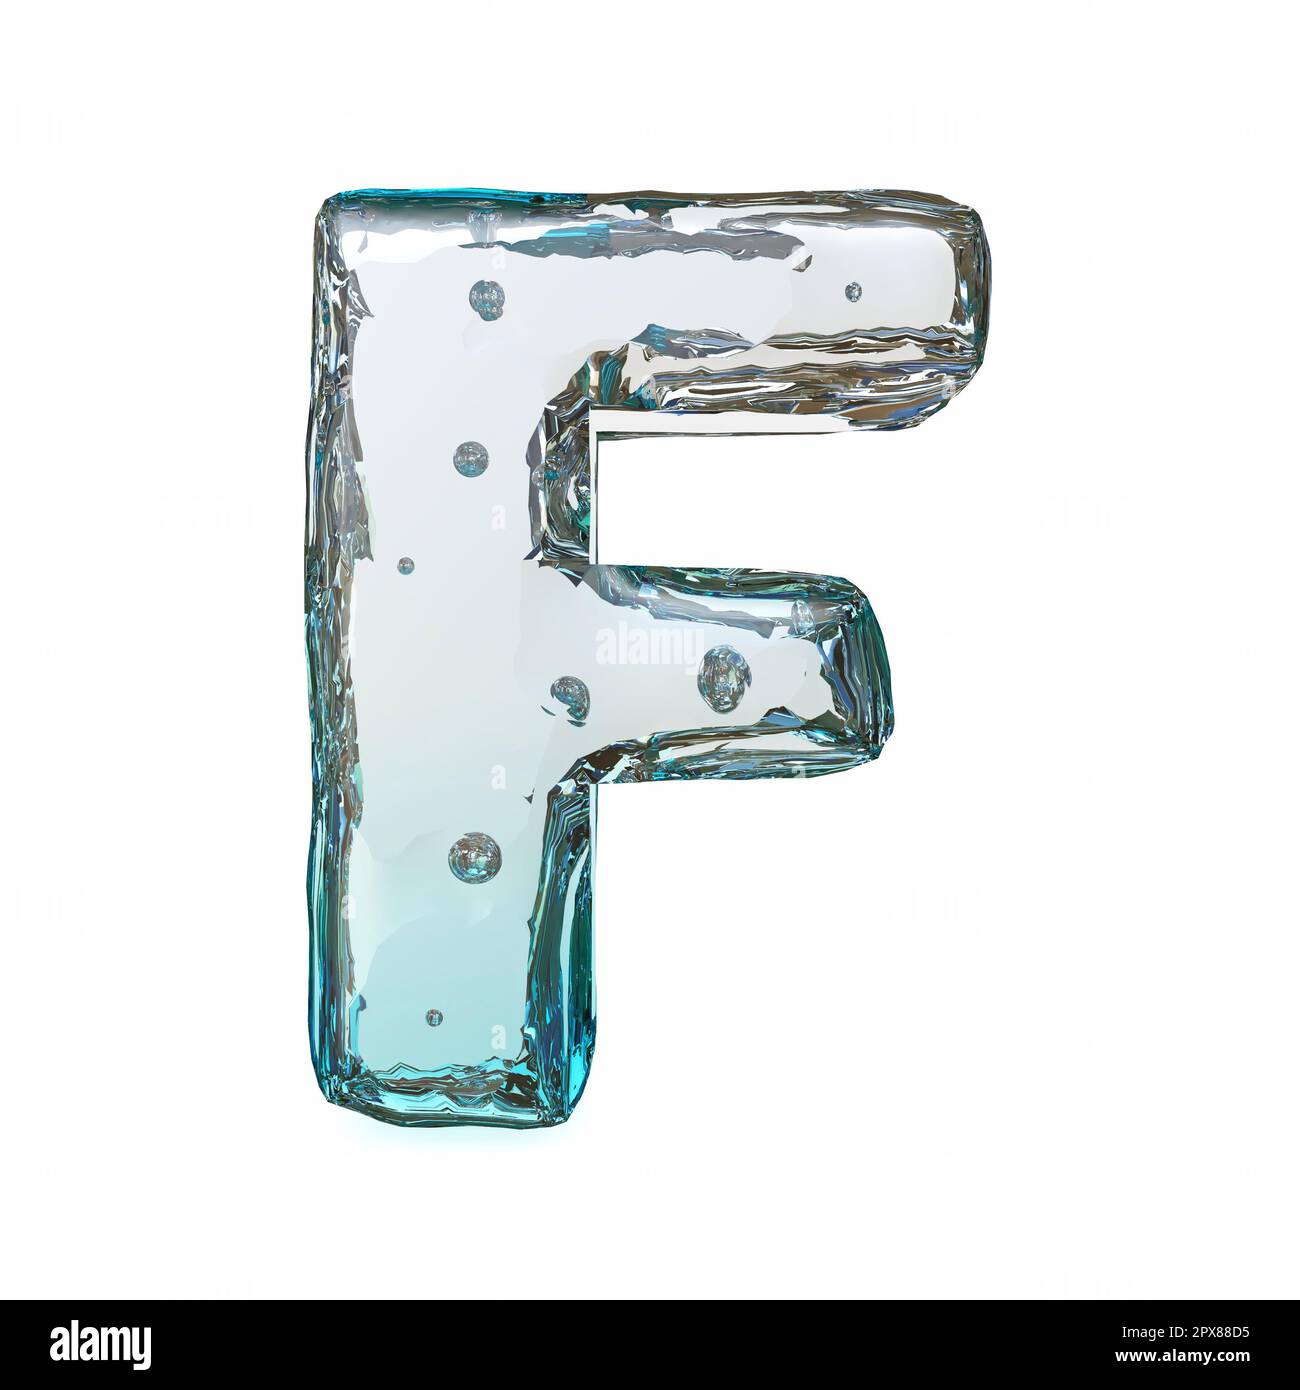 Blue ice font Letter F 3D rendering illustration isolated on white background Stock Photo